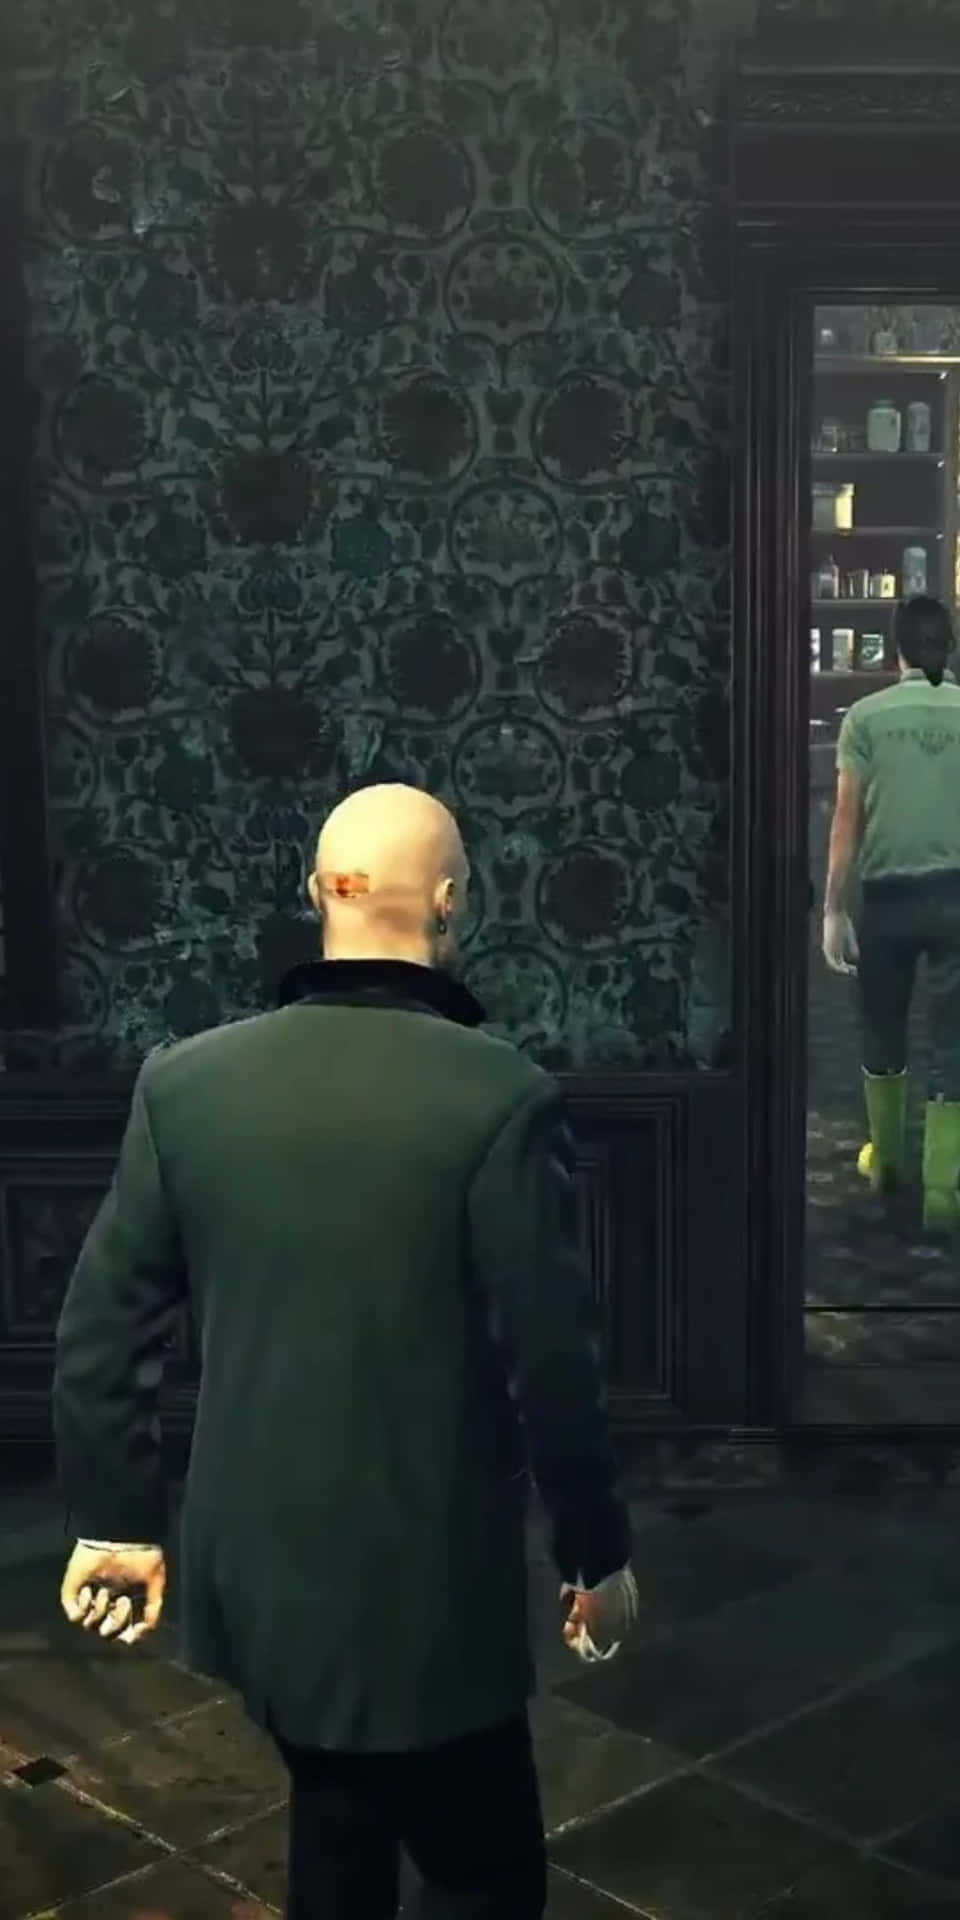 Agent 47 in the world of mystery and adventure